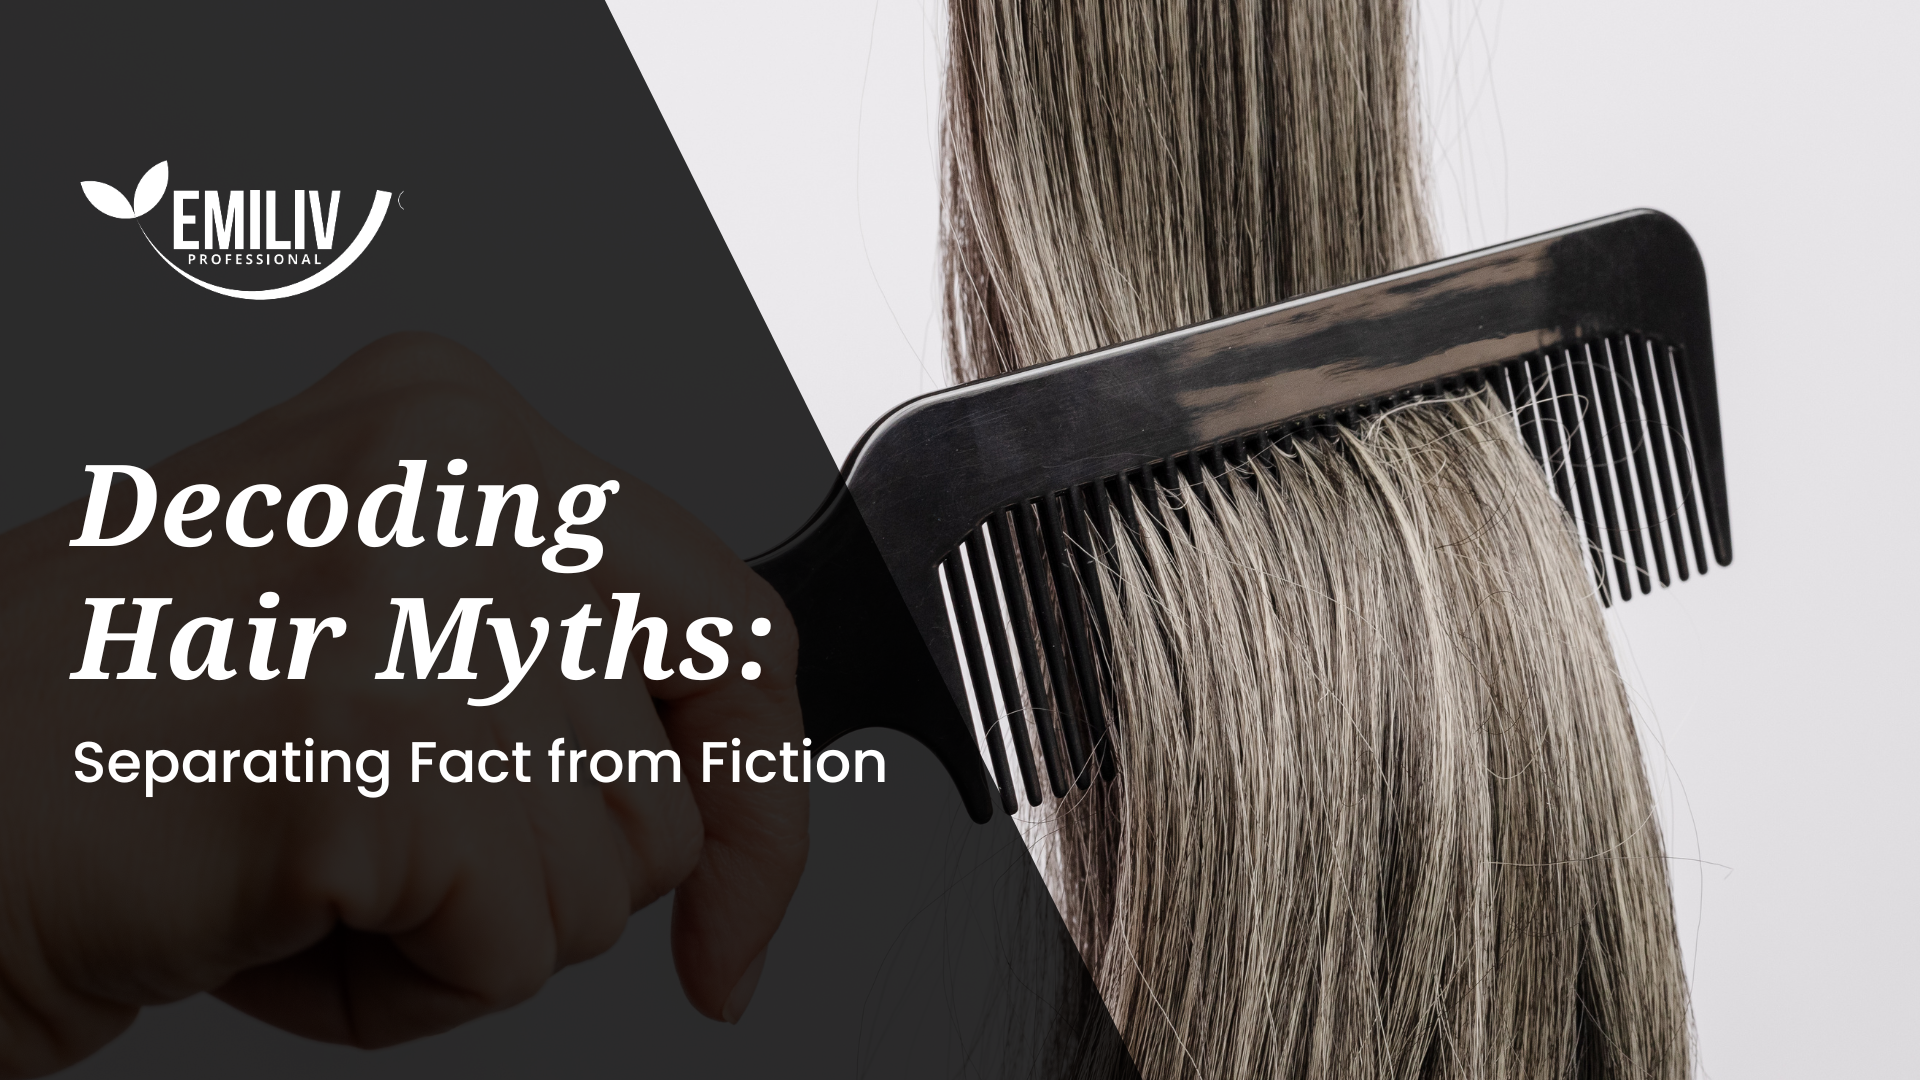 Decoding Hair Myths: Separating Fact from Fiction